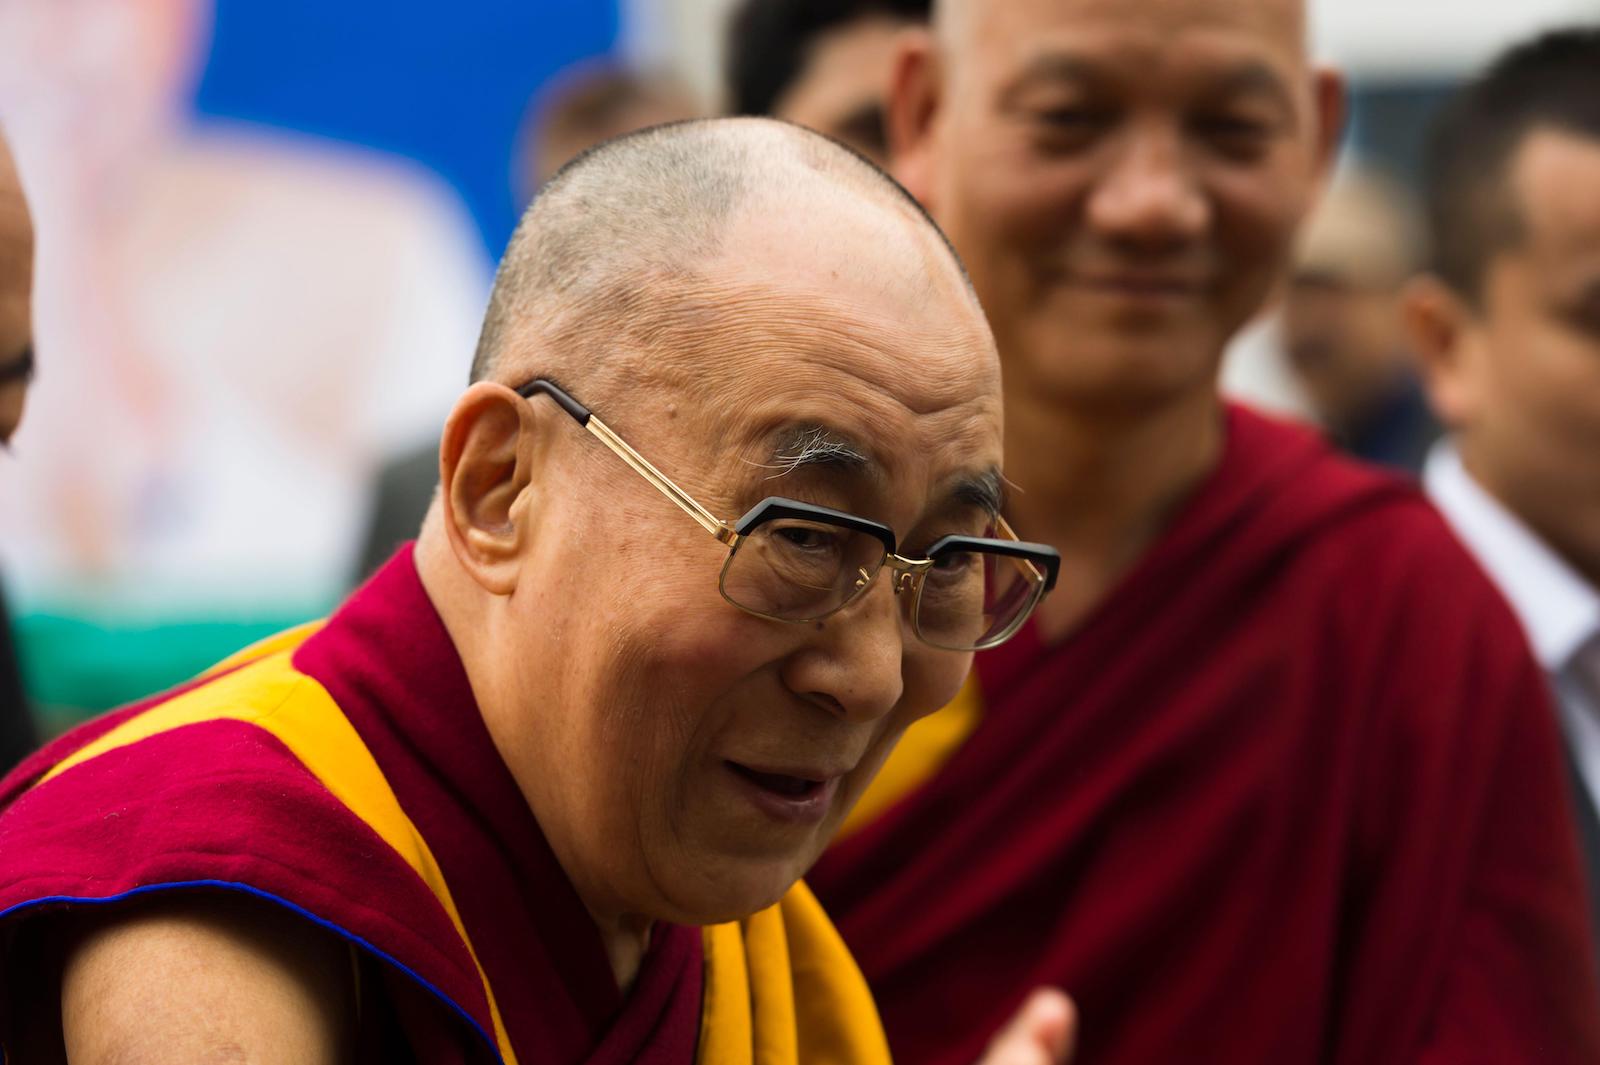 Buddha Buzz Weekly: Ithaca’s Namgyal Monastery Will Build the First Dalai Lama Library and Learning Center/ Tricycle